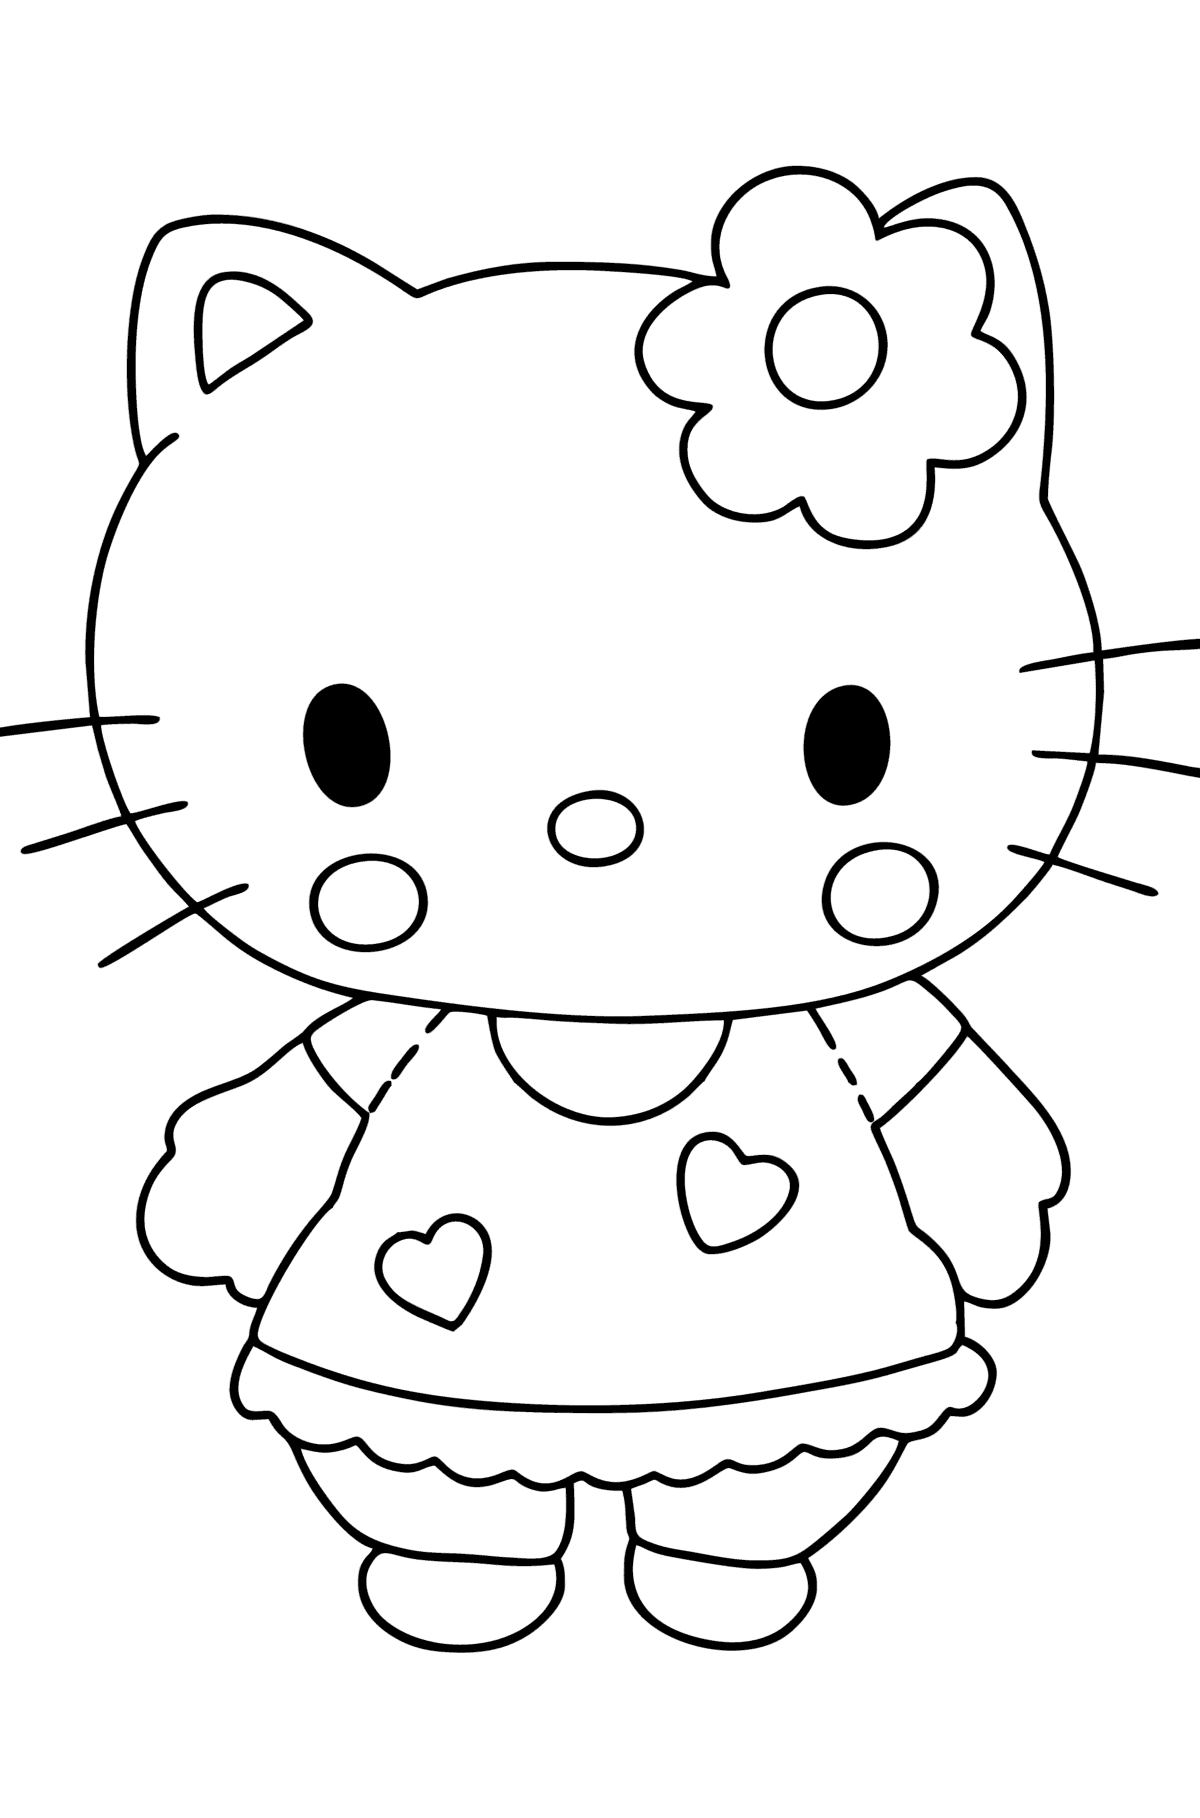 Hello Kitty coloring page ♥ Online and Print for Free